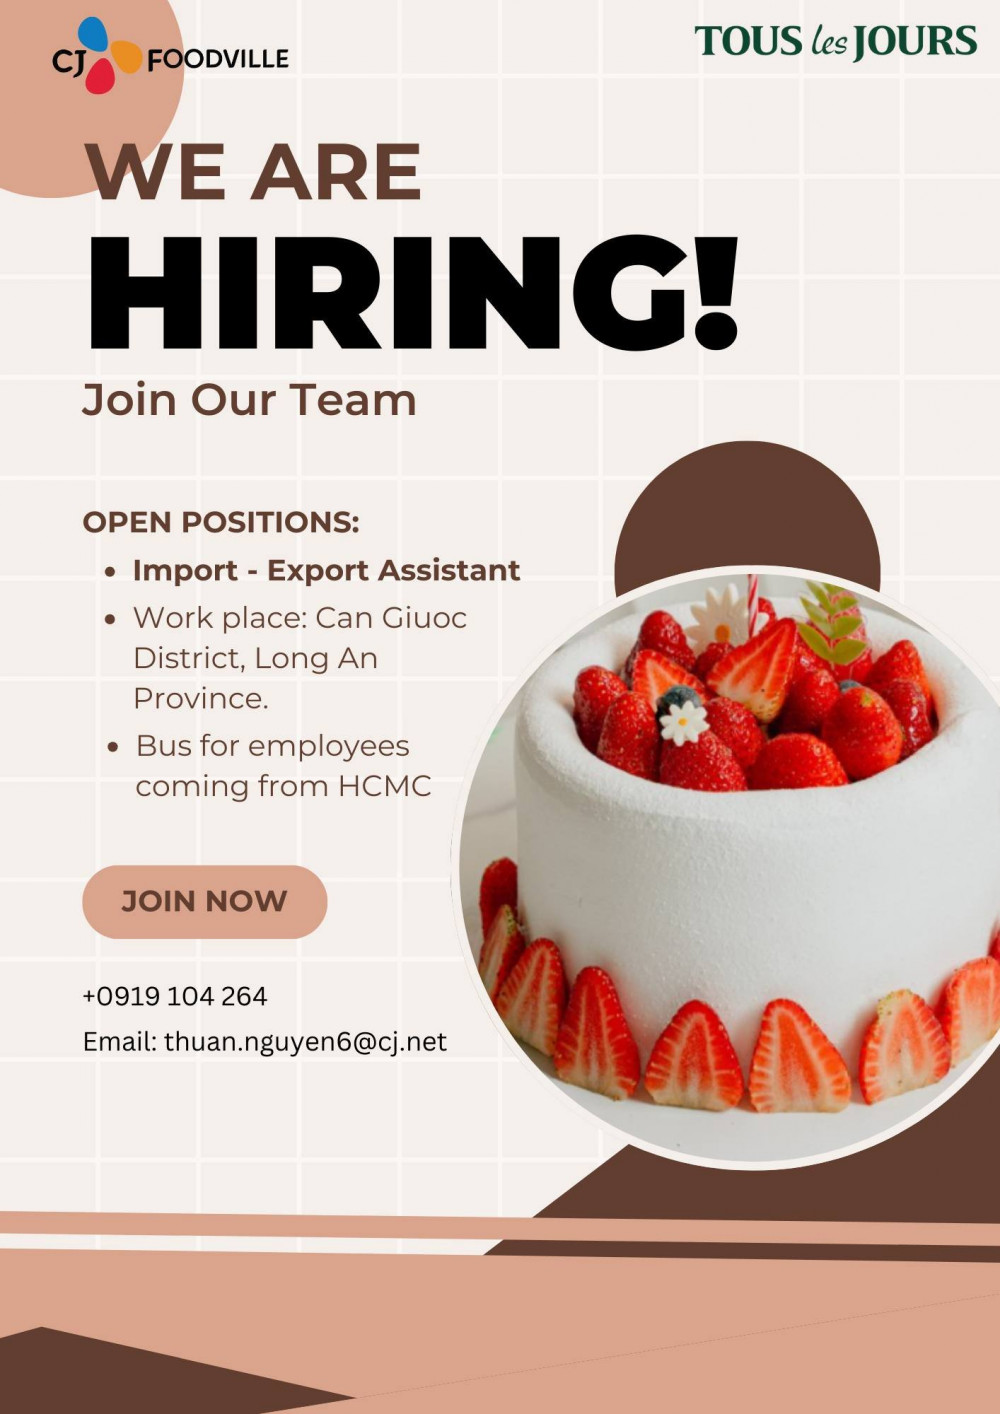 [CJ Foodville - Long An] We're hiring for the position of Import - Export Assistant / Trợ lý Xuất nhập khẩu.